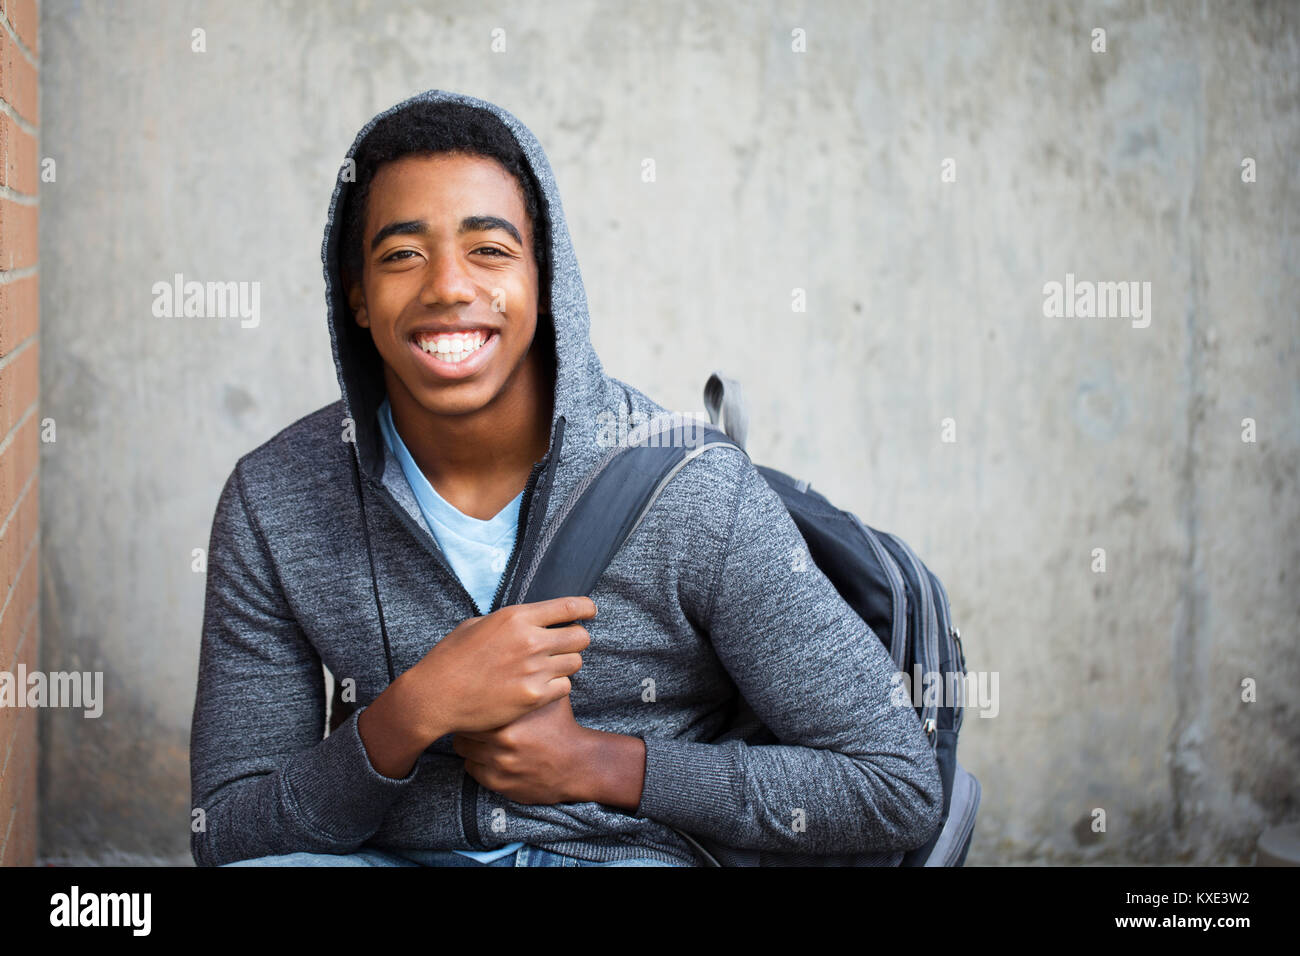 Young African American teen at school. Stock Photo